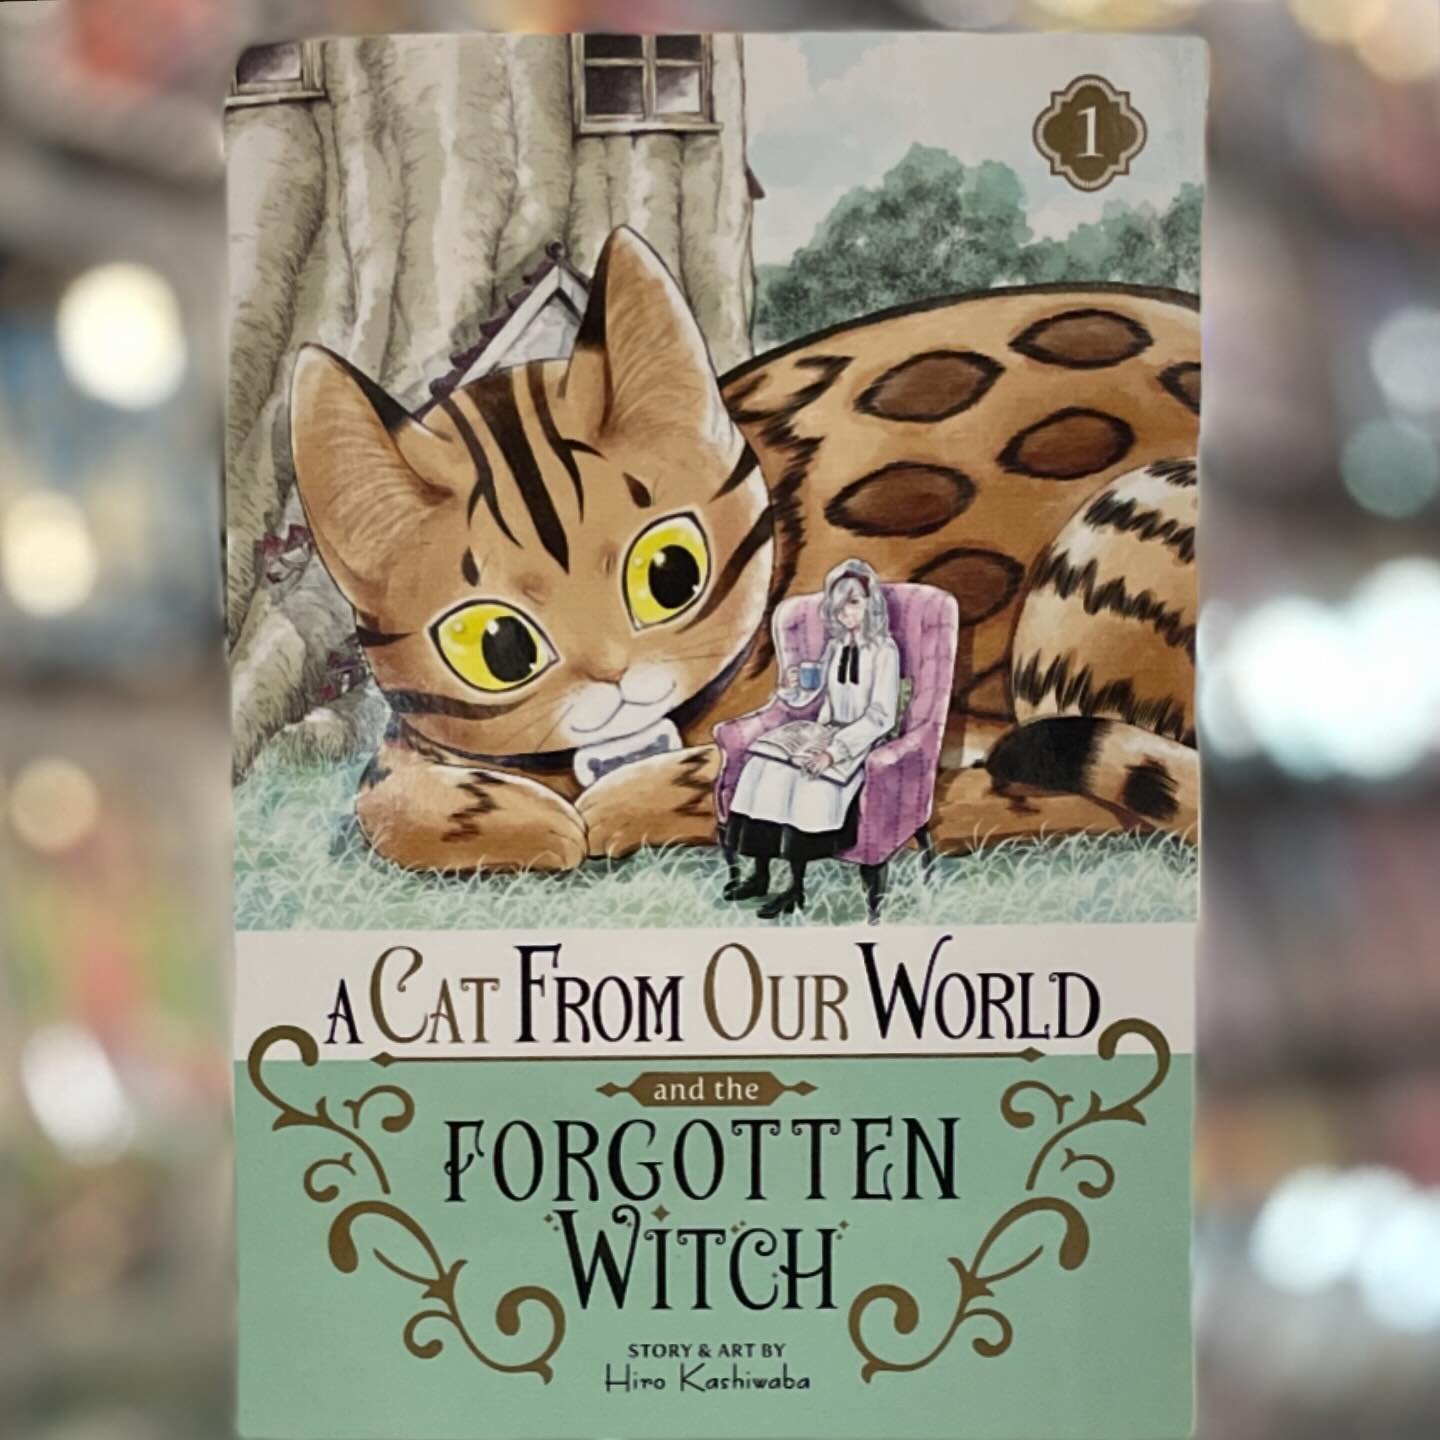 In her youth, Jeanne was a powerful witch who vanquished the evil Demon King and saved the world-but over time, the people she rescued have forgotten her. Now she is a lonely old woman living in a secluded forest... until she accidentally summons a c